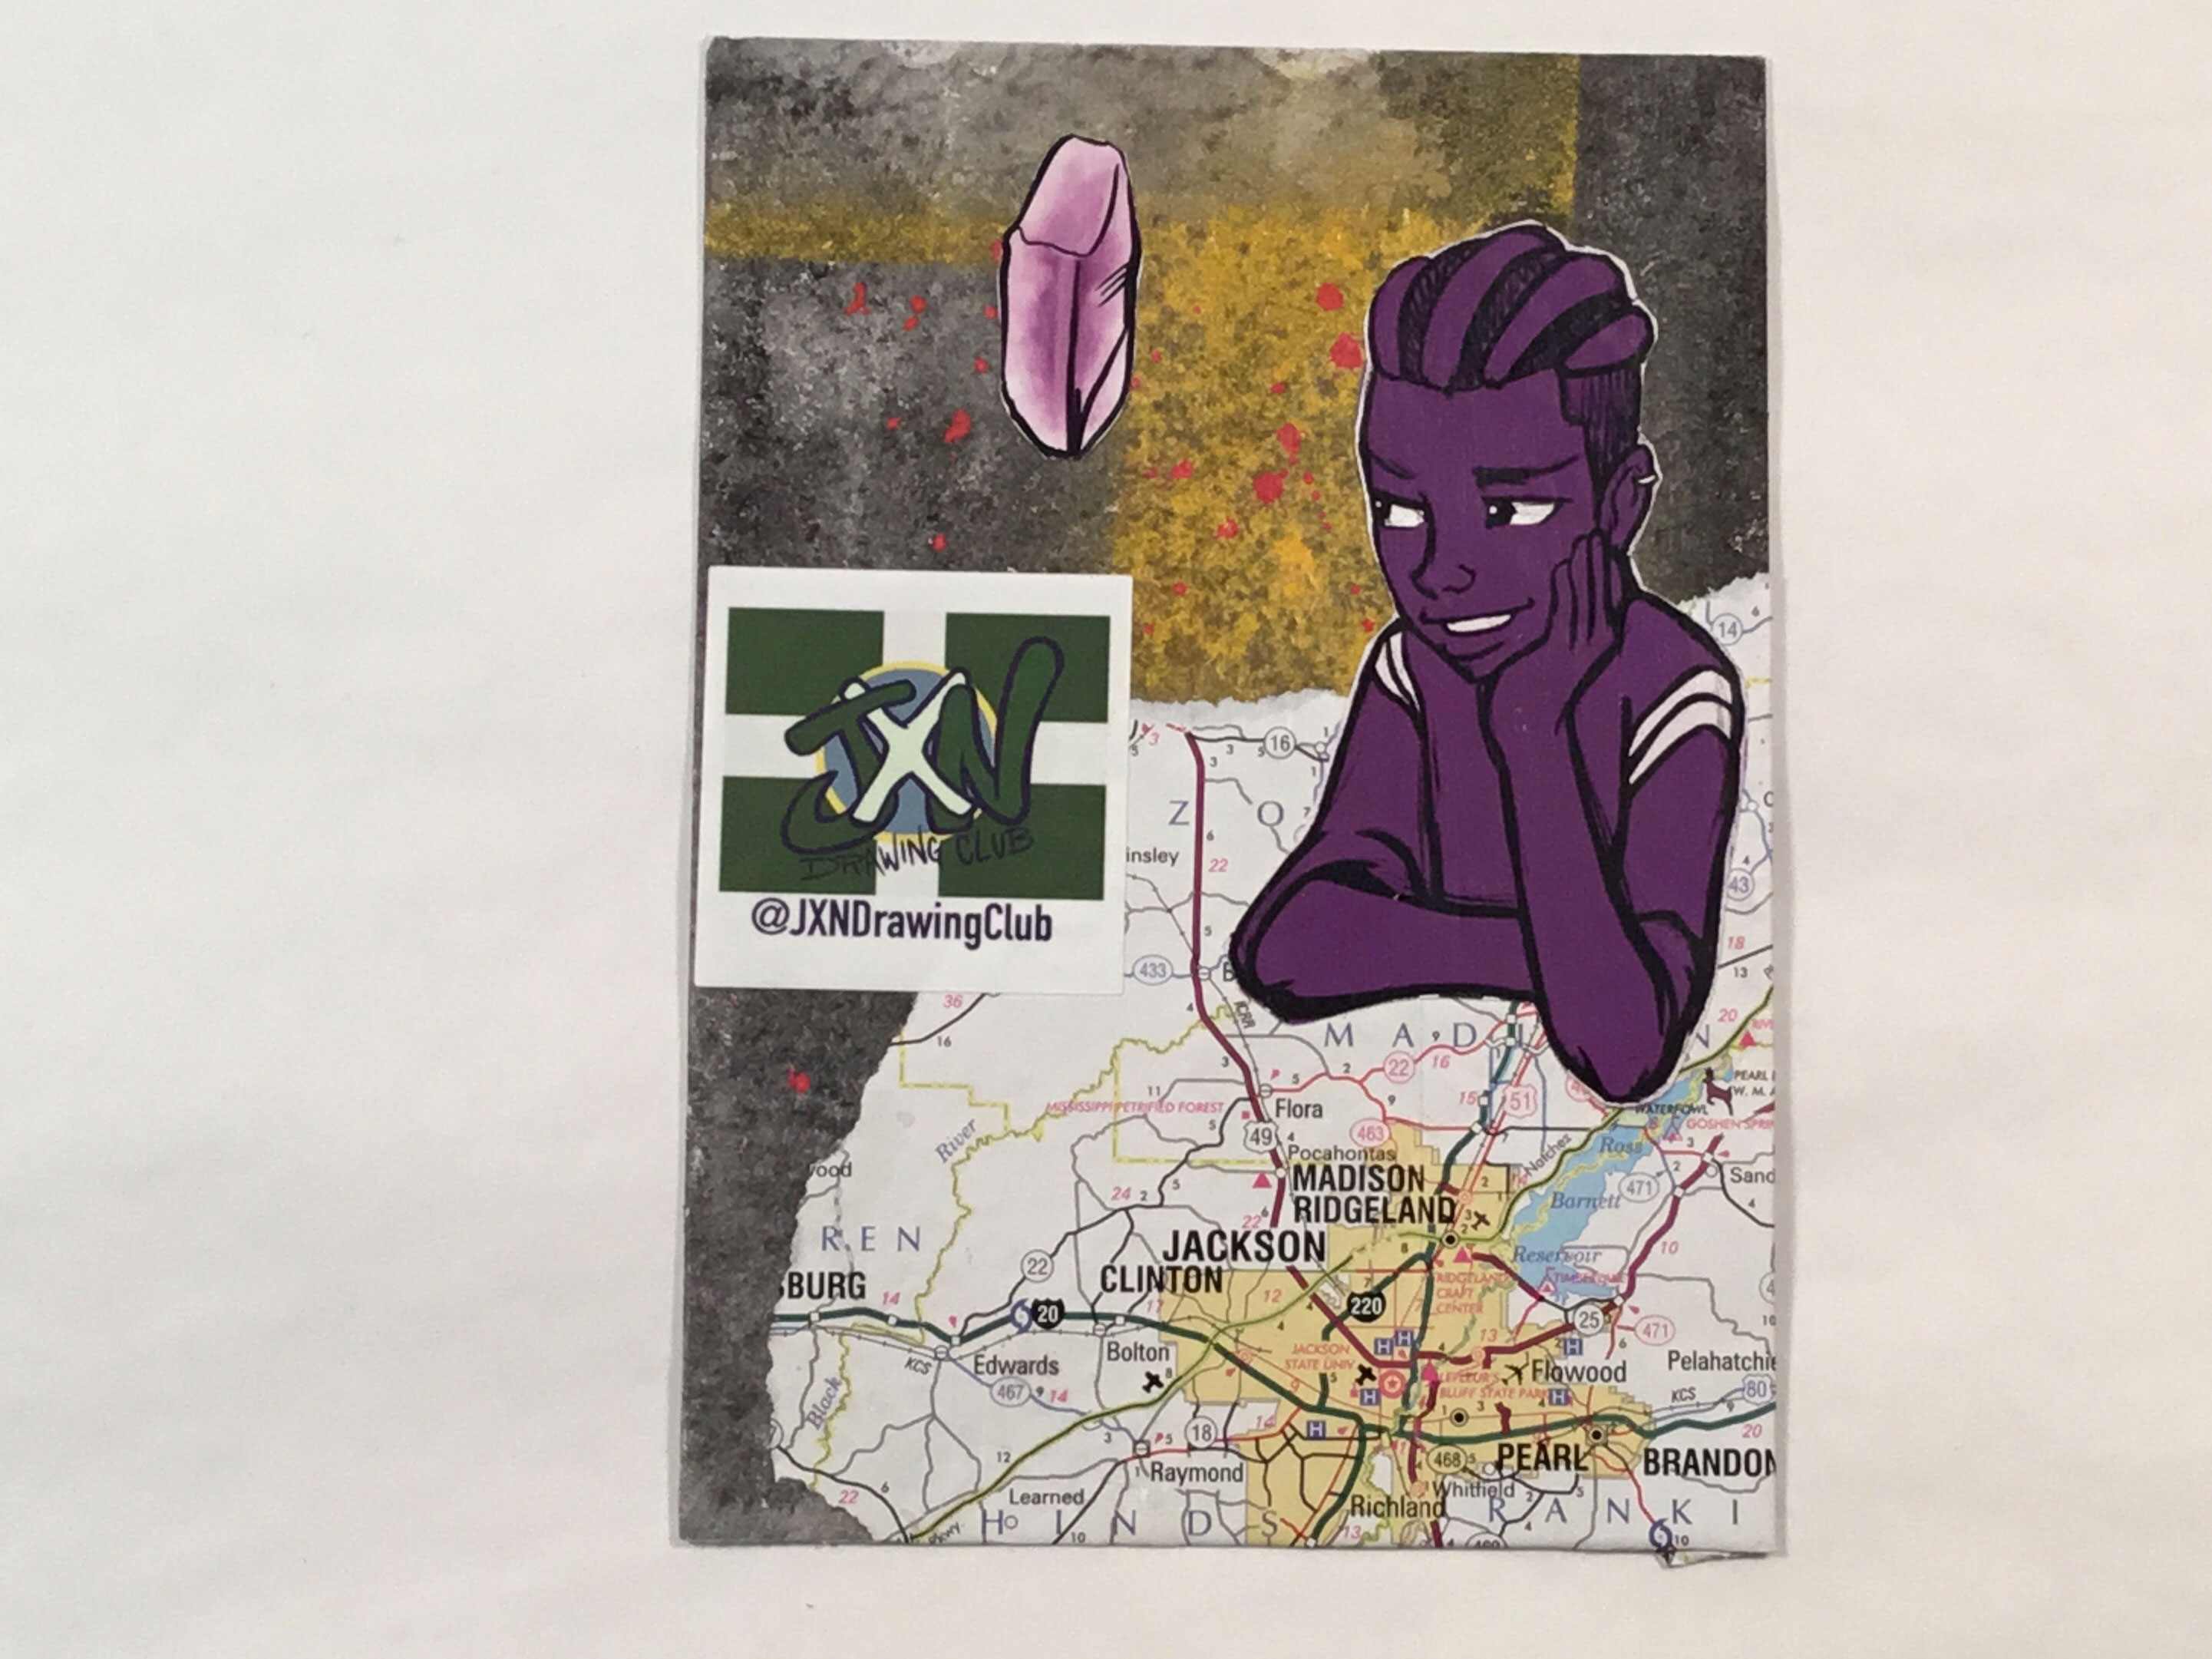 A purple illustration of a young African American man sits atop a torn section of a map depicting Jackson, Mississippi. In the background is a gray and yellow paper with red paint splatters on top, as well as a light purple illustration of a crystal in the top left corner.